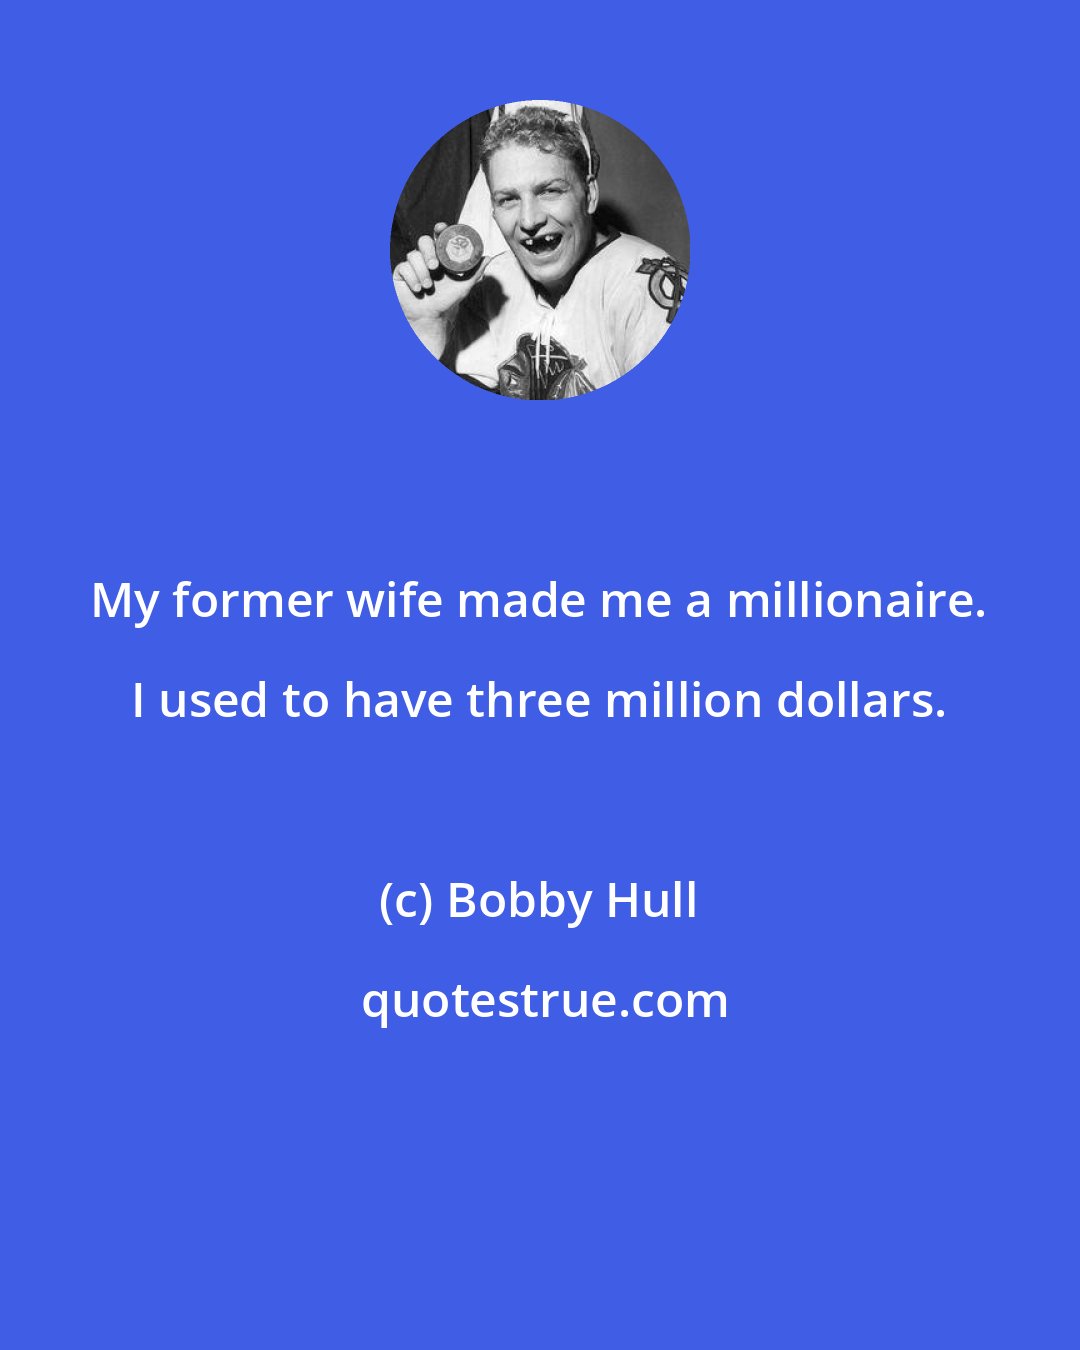 Bobby Hull: My former wife made me a millionaire. I used to have three million dollars.